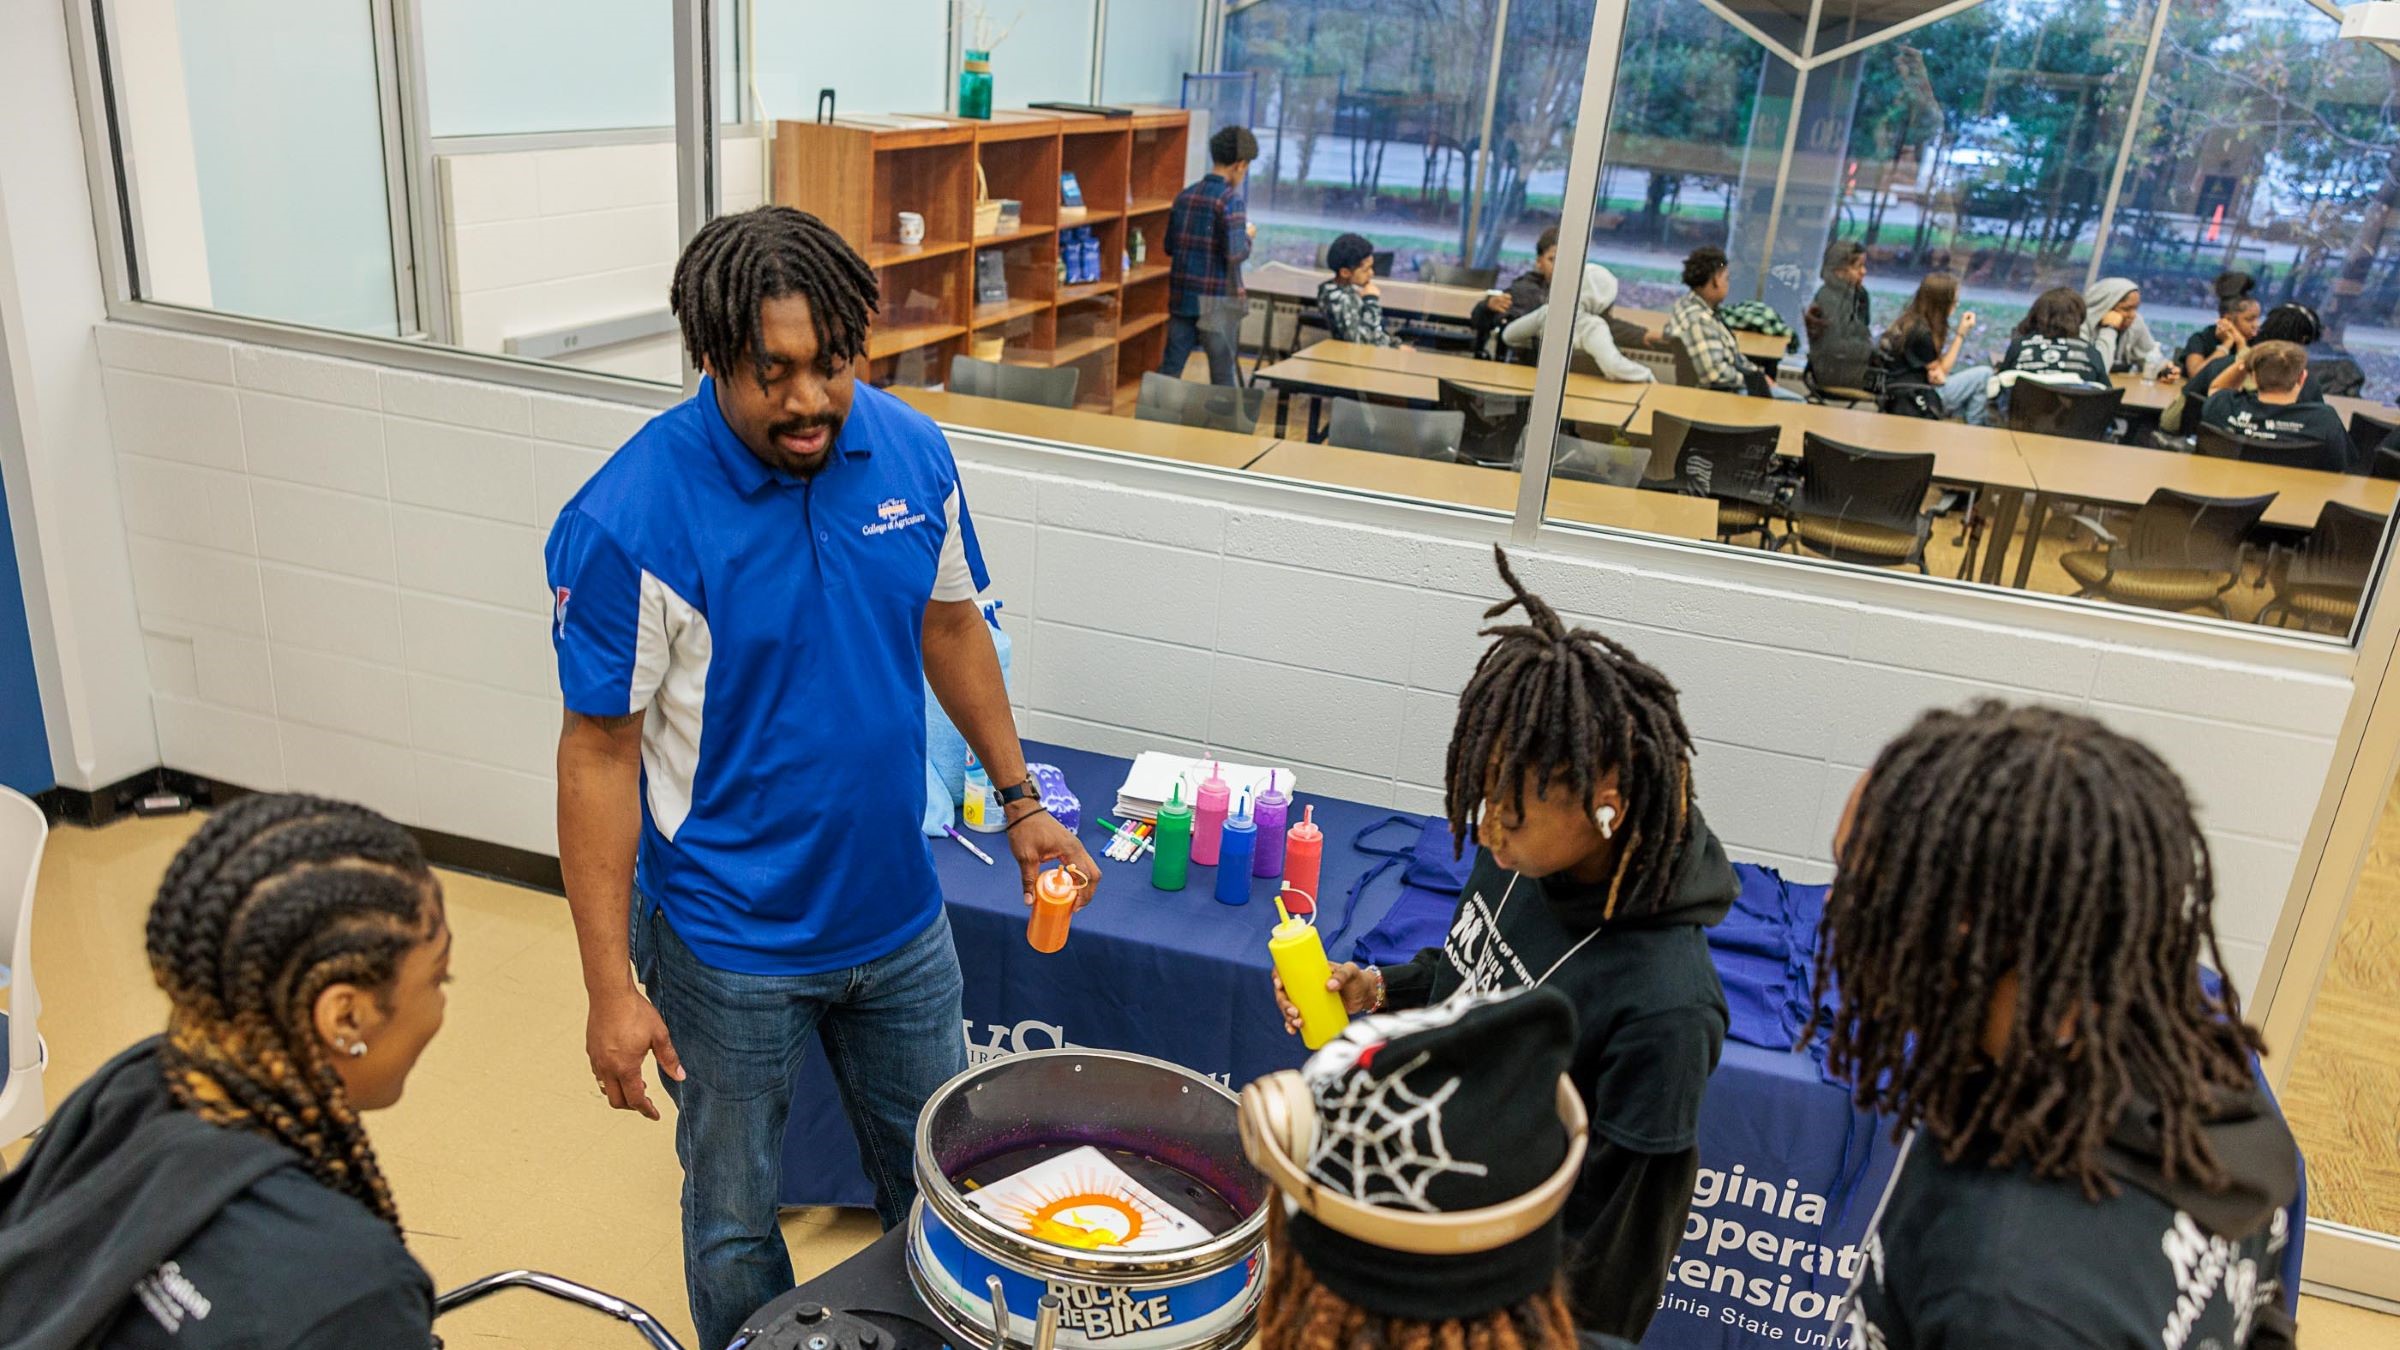 Staff from Virginia State University helped students reimagine how art is made | Courtesy Matt Barton